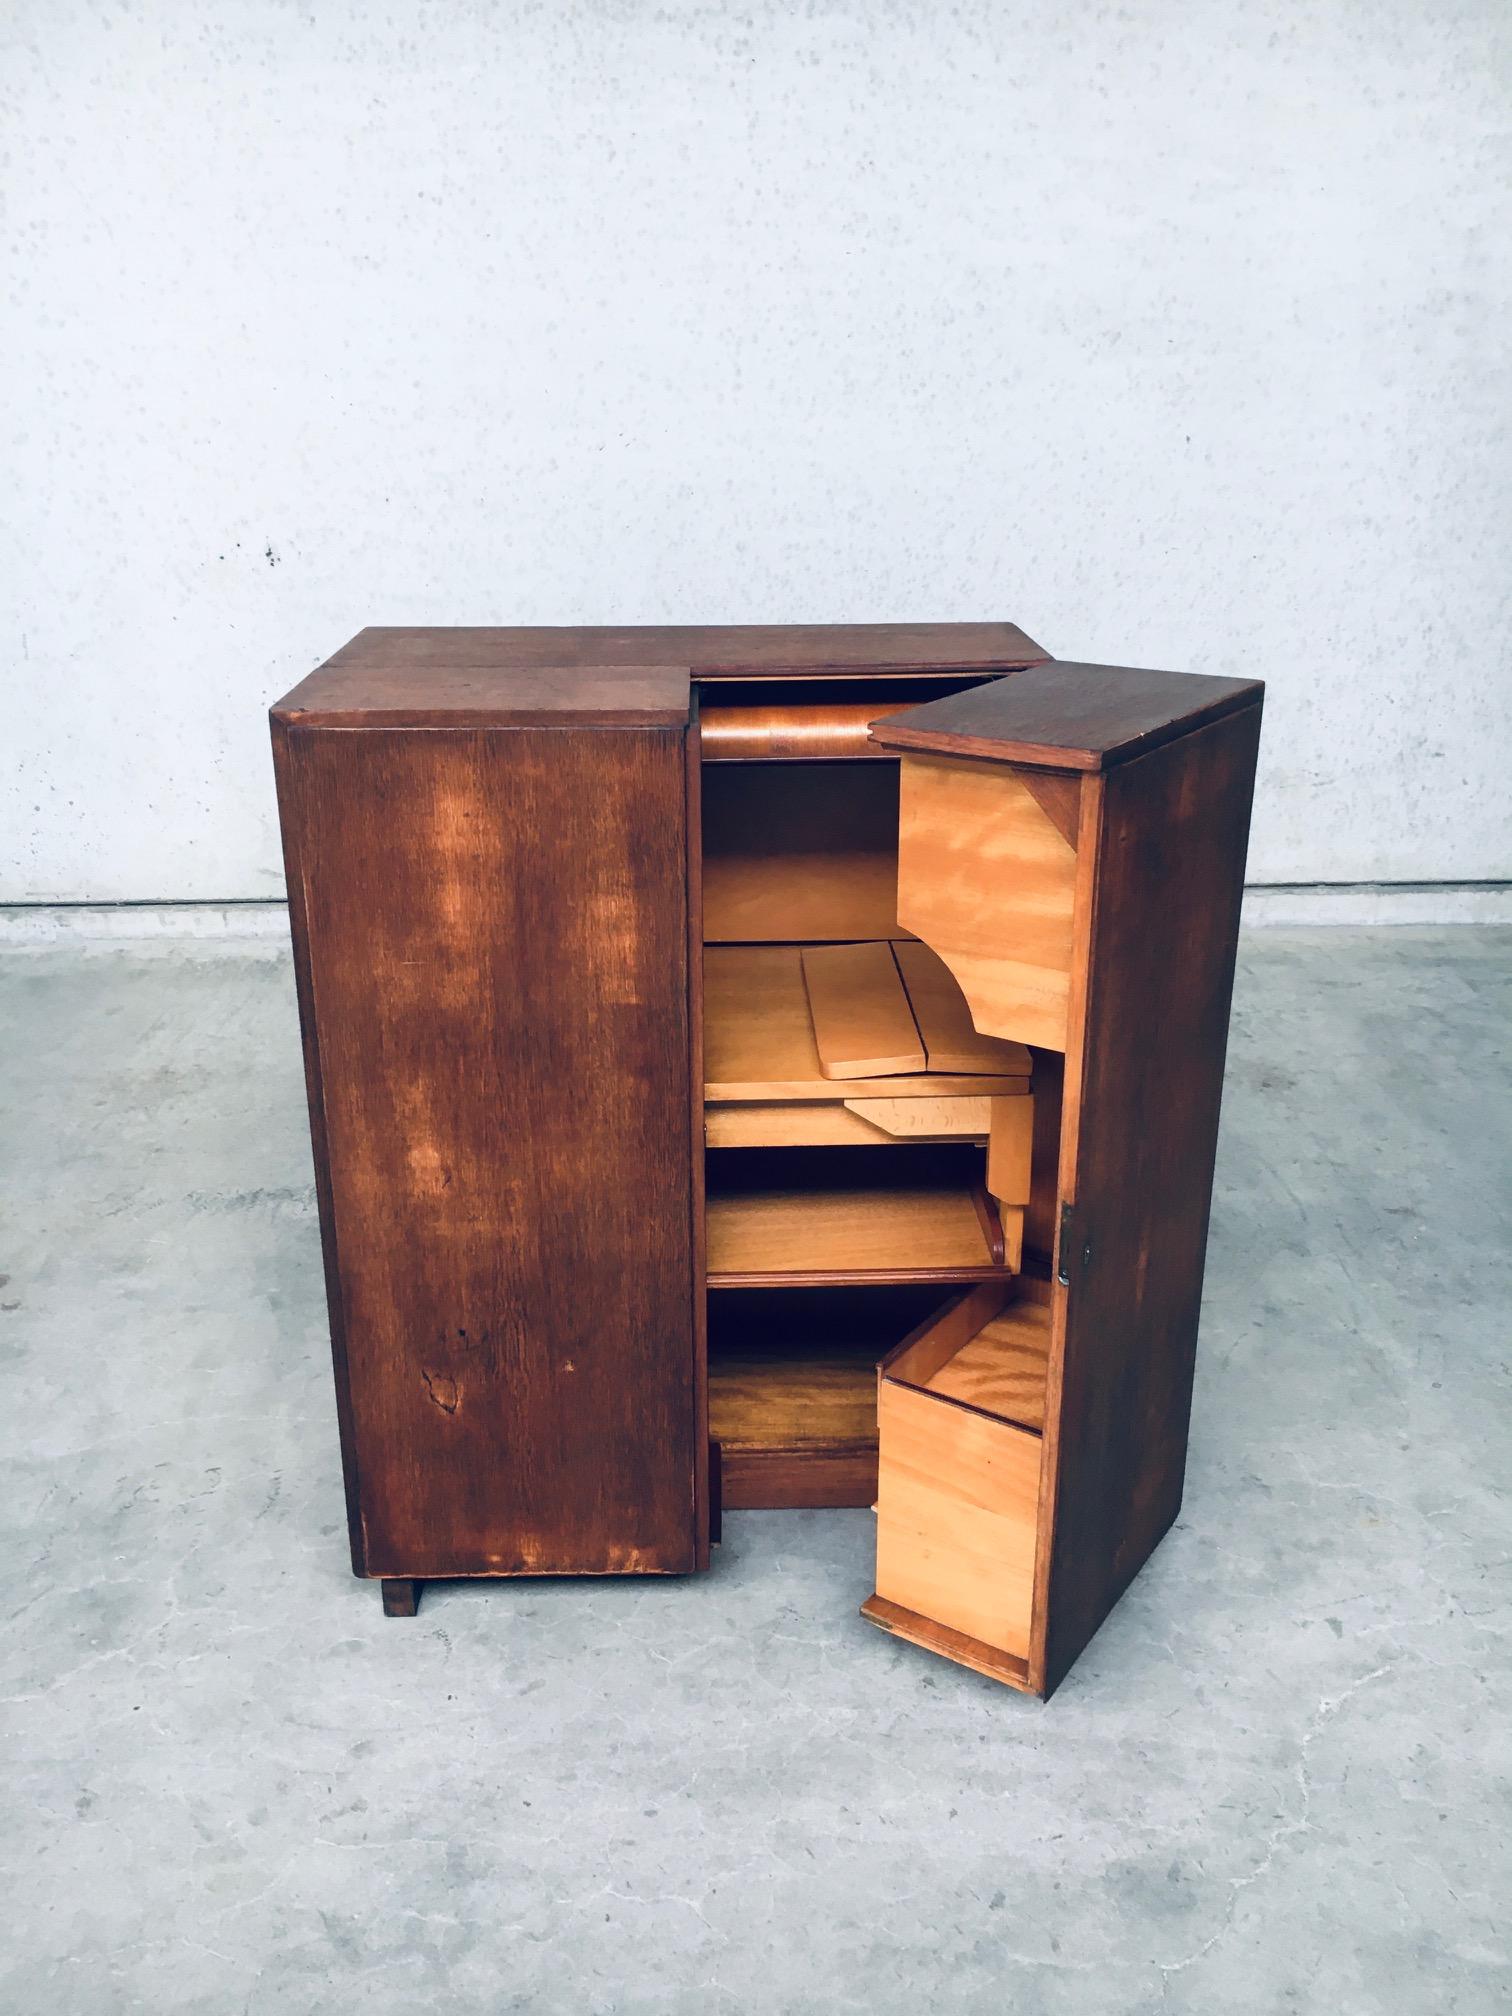 Vintage mid-century Swiss design magic box desk by Mummenthaler & Meier. The 'MAGIC BOX' desk or secretaire was designed by Mummenthaler and Meier in Switzerland in the 1950's / 60's. The piece closes completely and can be key-locked (key not